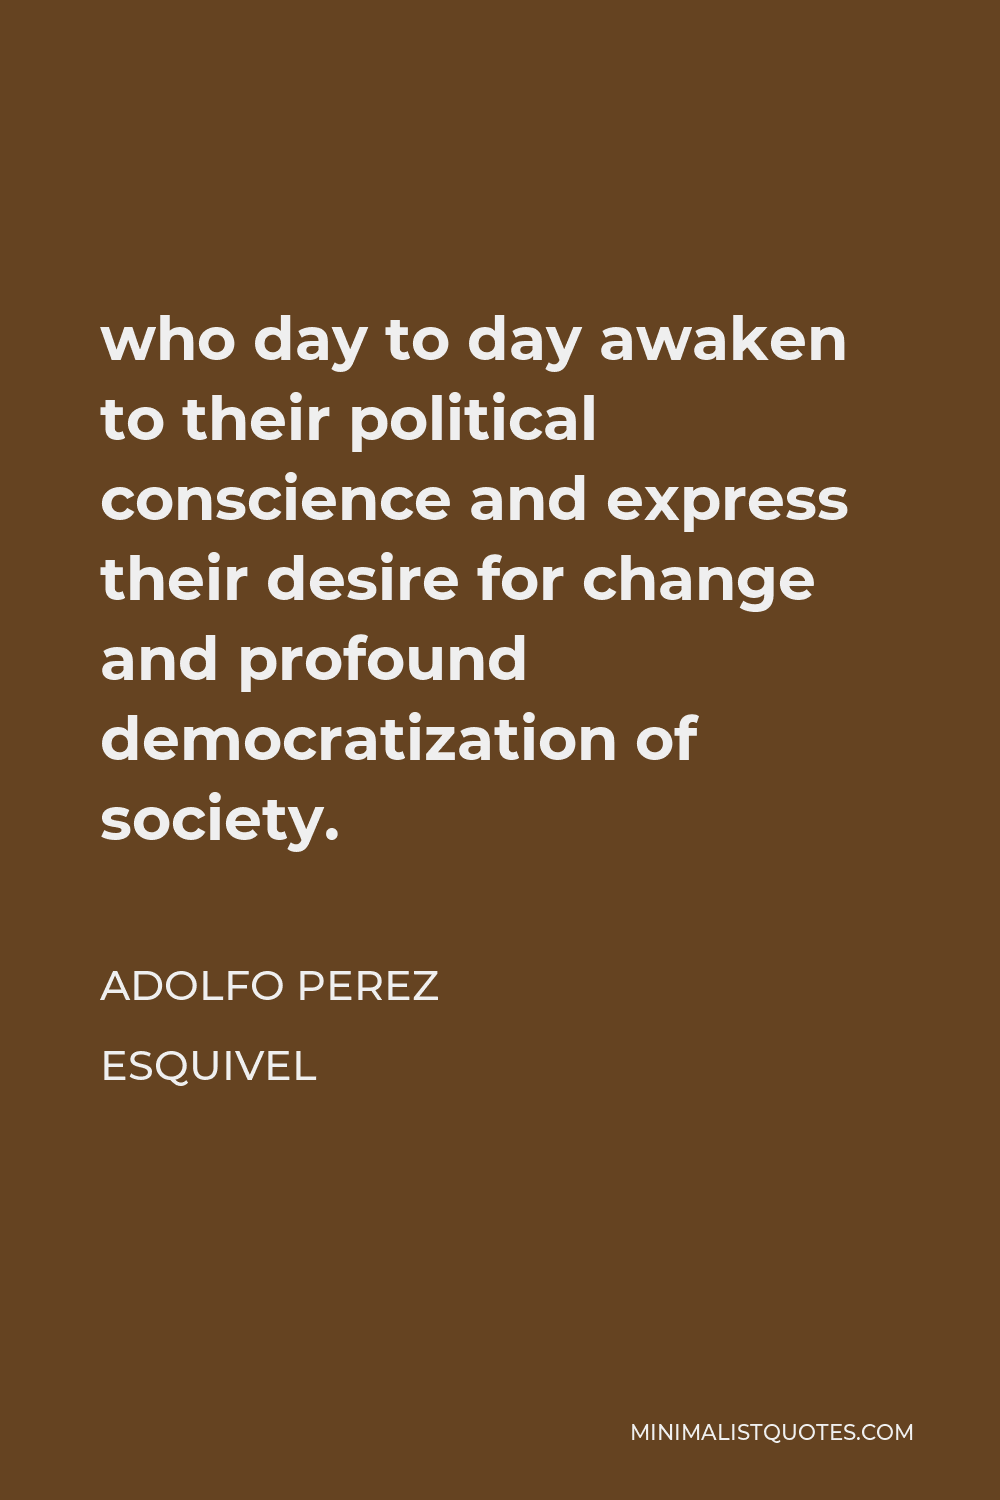 Adolfo Perez Esquivel Quote - who day to day awaken to their political conscience and express their desire for change and profound democratization of society.